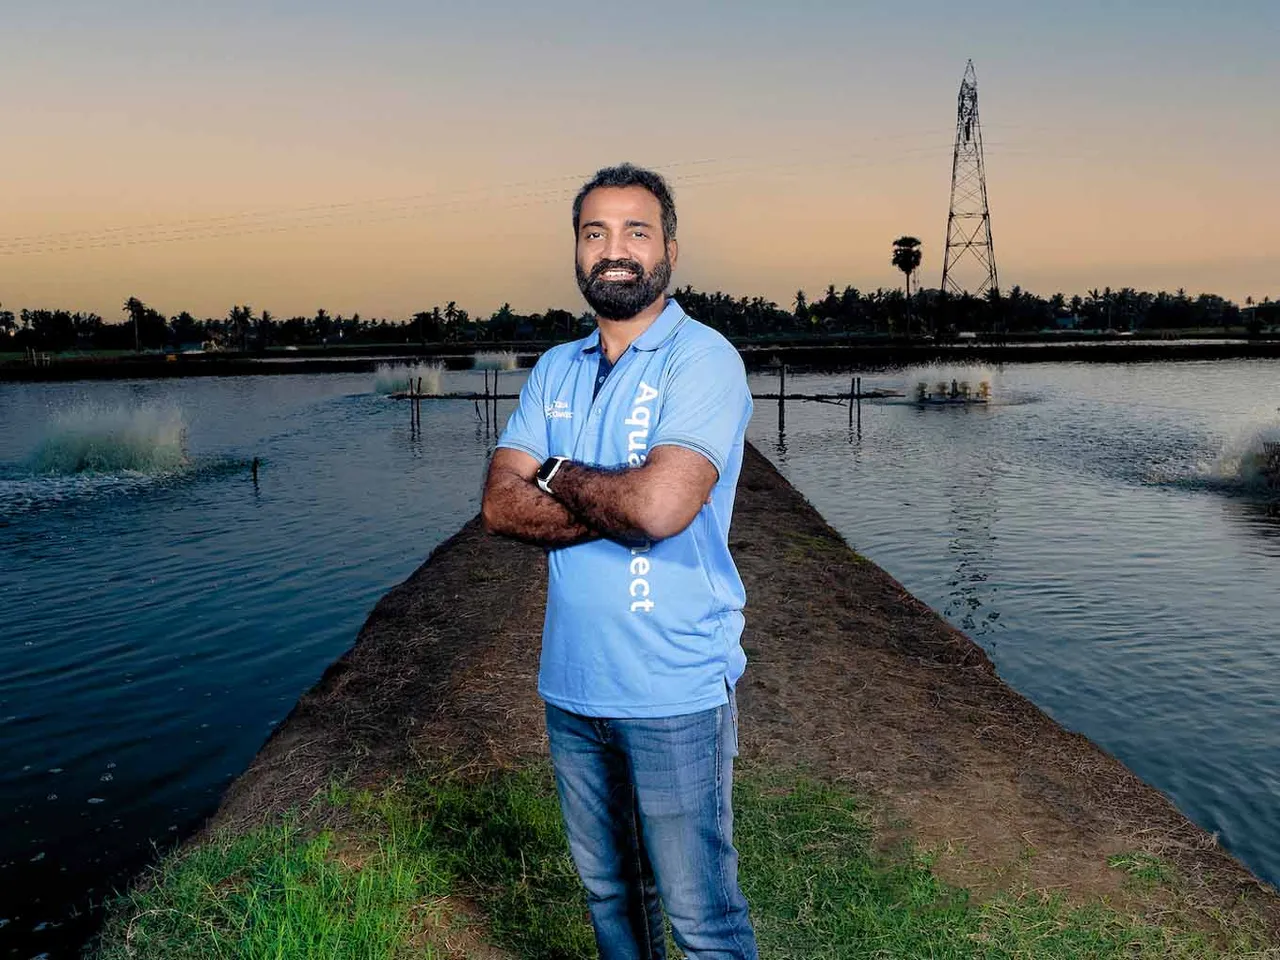 Aquaculture startup Aquaconnect raises $8M in funding led by Trifecta Capital